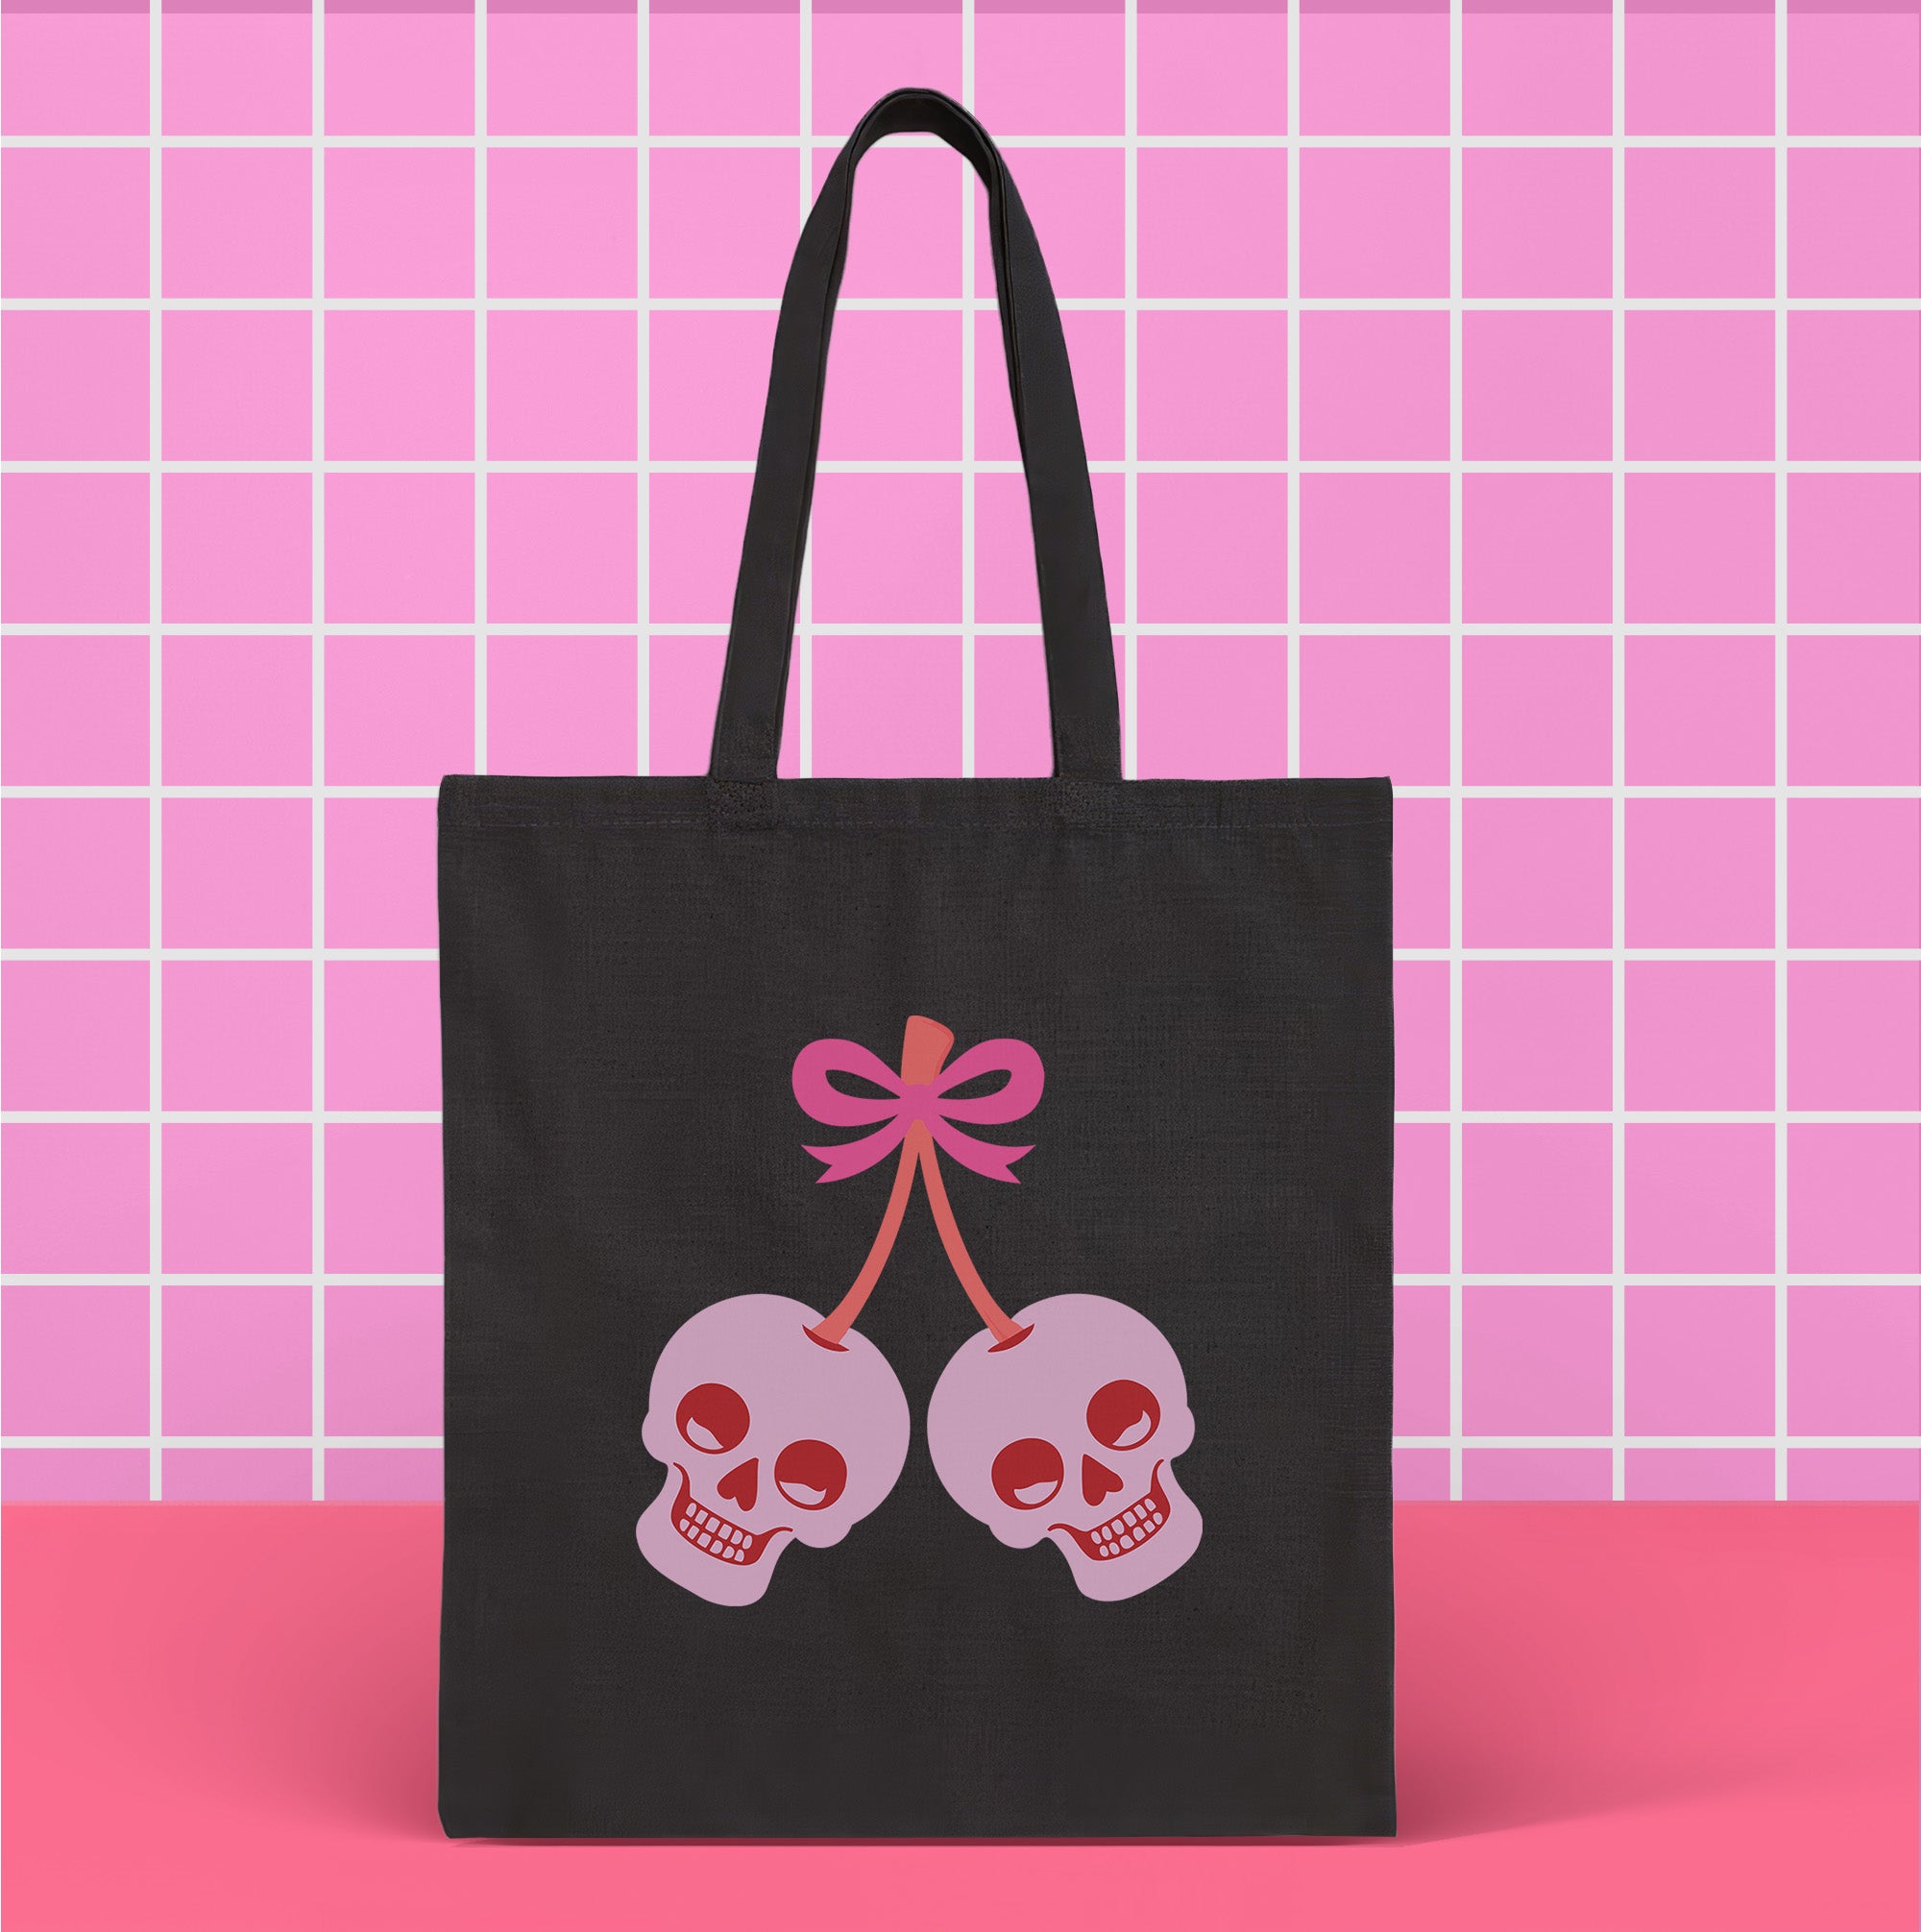 Canvas tote bag featuring pink skull cherries design. Two pink skulls connected by red stem and bow. Quirky gothic-inspired graphic on cream background. Stylish, edgy accessory for everyday use. Perfect for alternative fashion lovers.